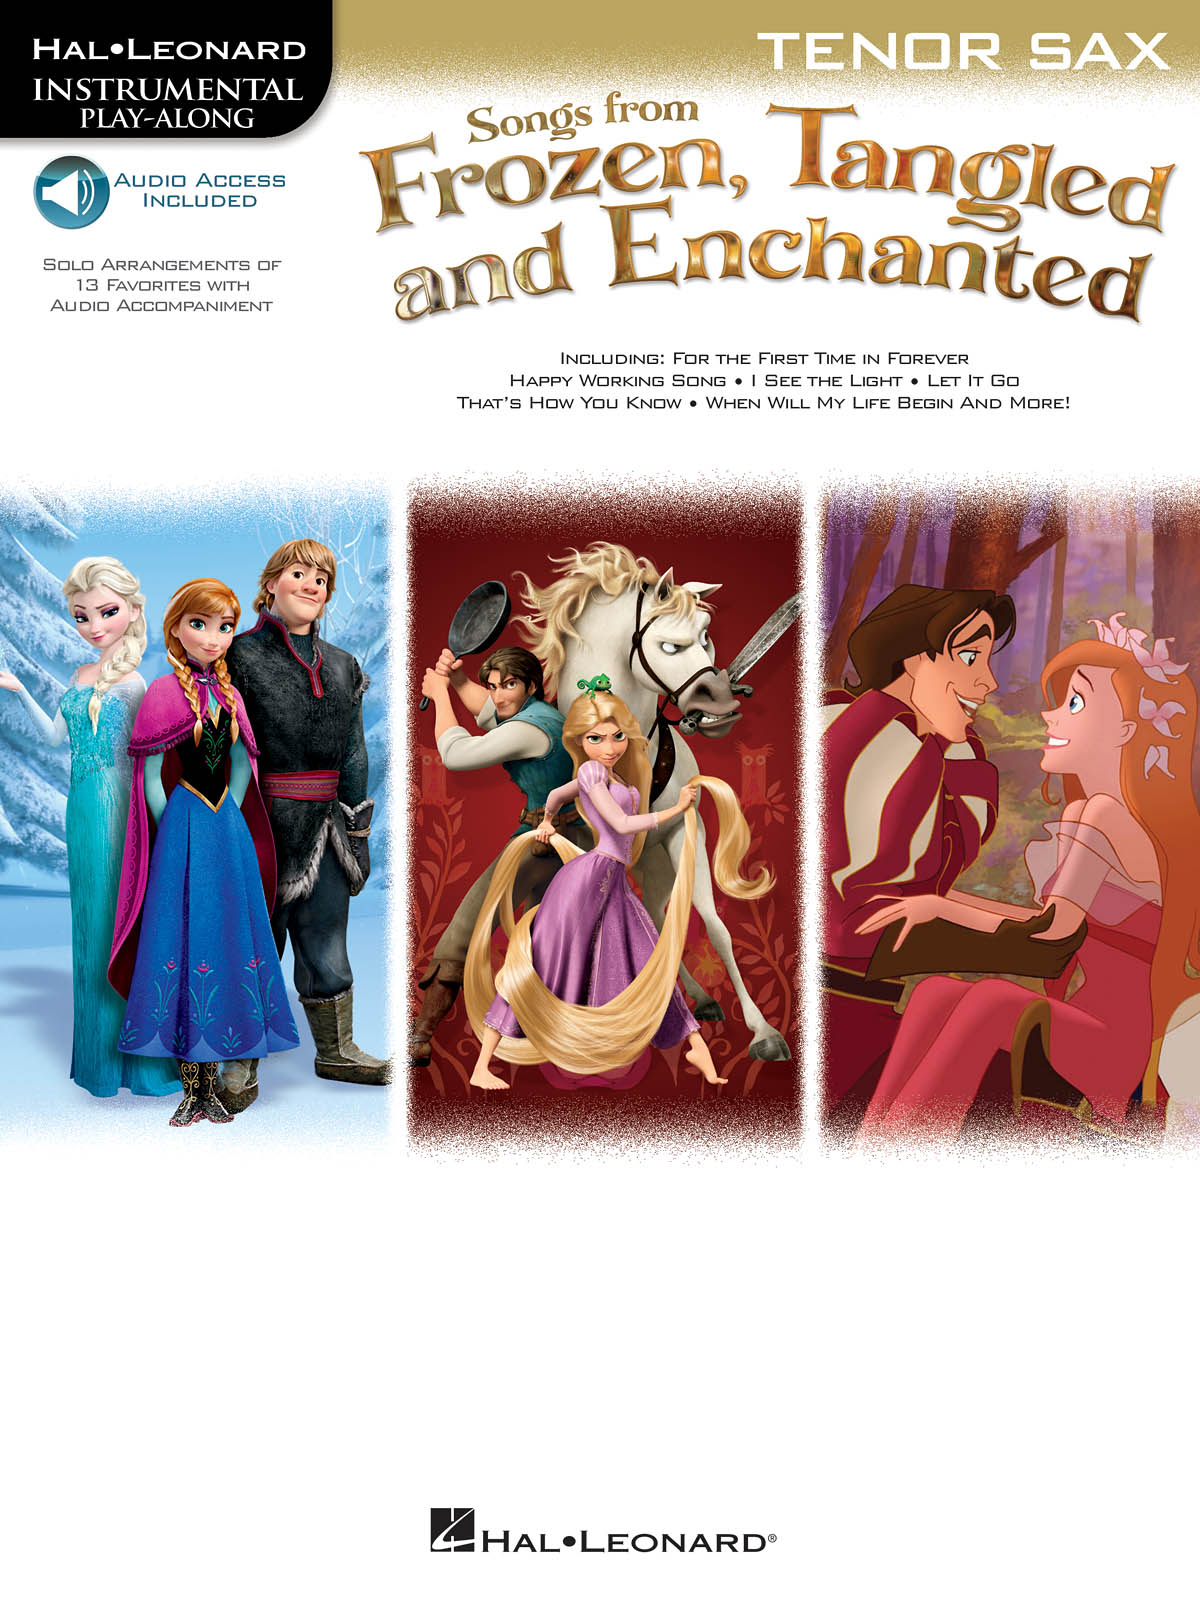 Songs from Frozen  Tangled and Enchanted: Tenor Saxophone: Instrumental Album